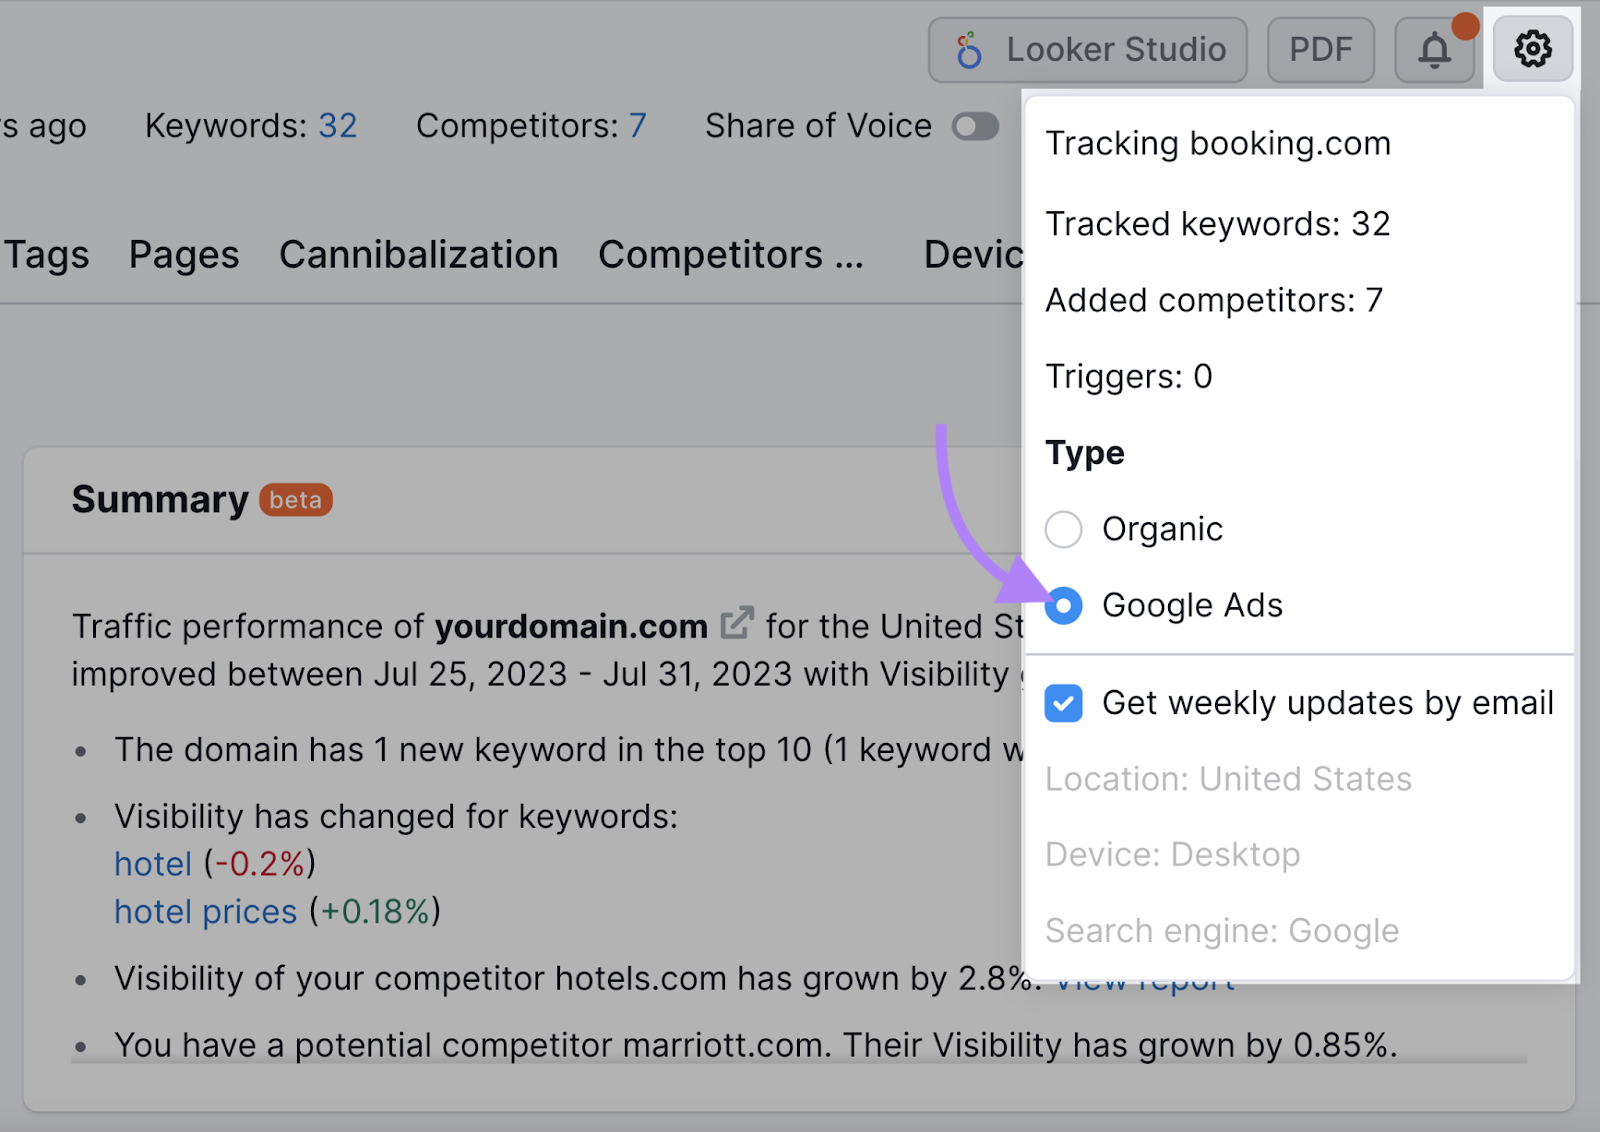 select "Google Ads" as type in the Position Tracking tool to see data related to the keywords you’re bidding on in your PPC campaigns